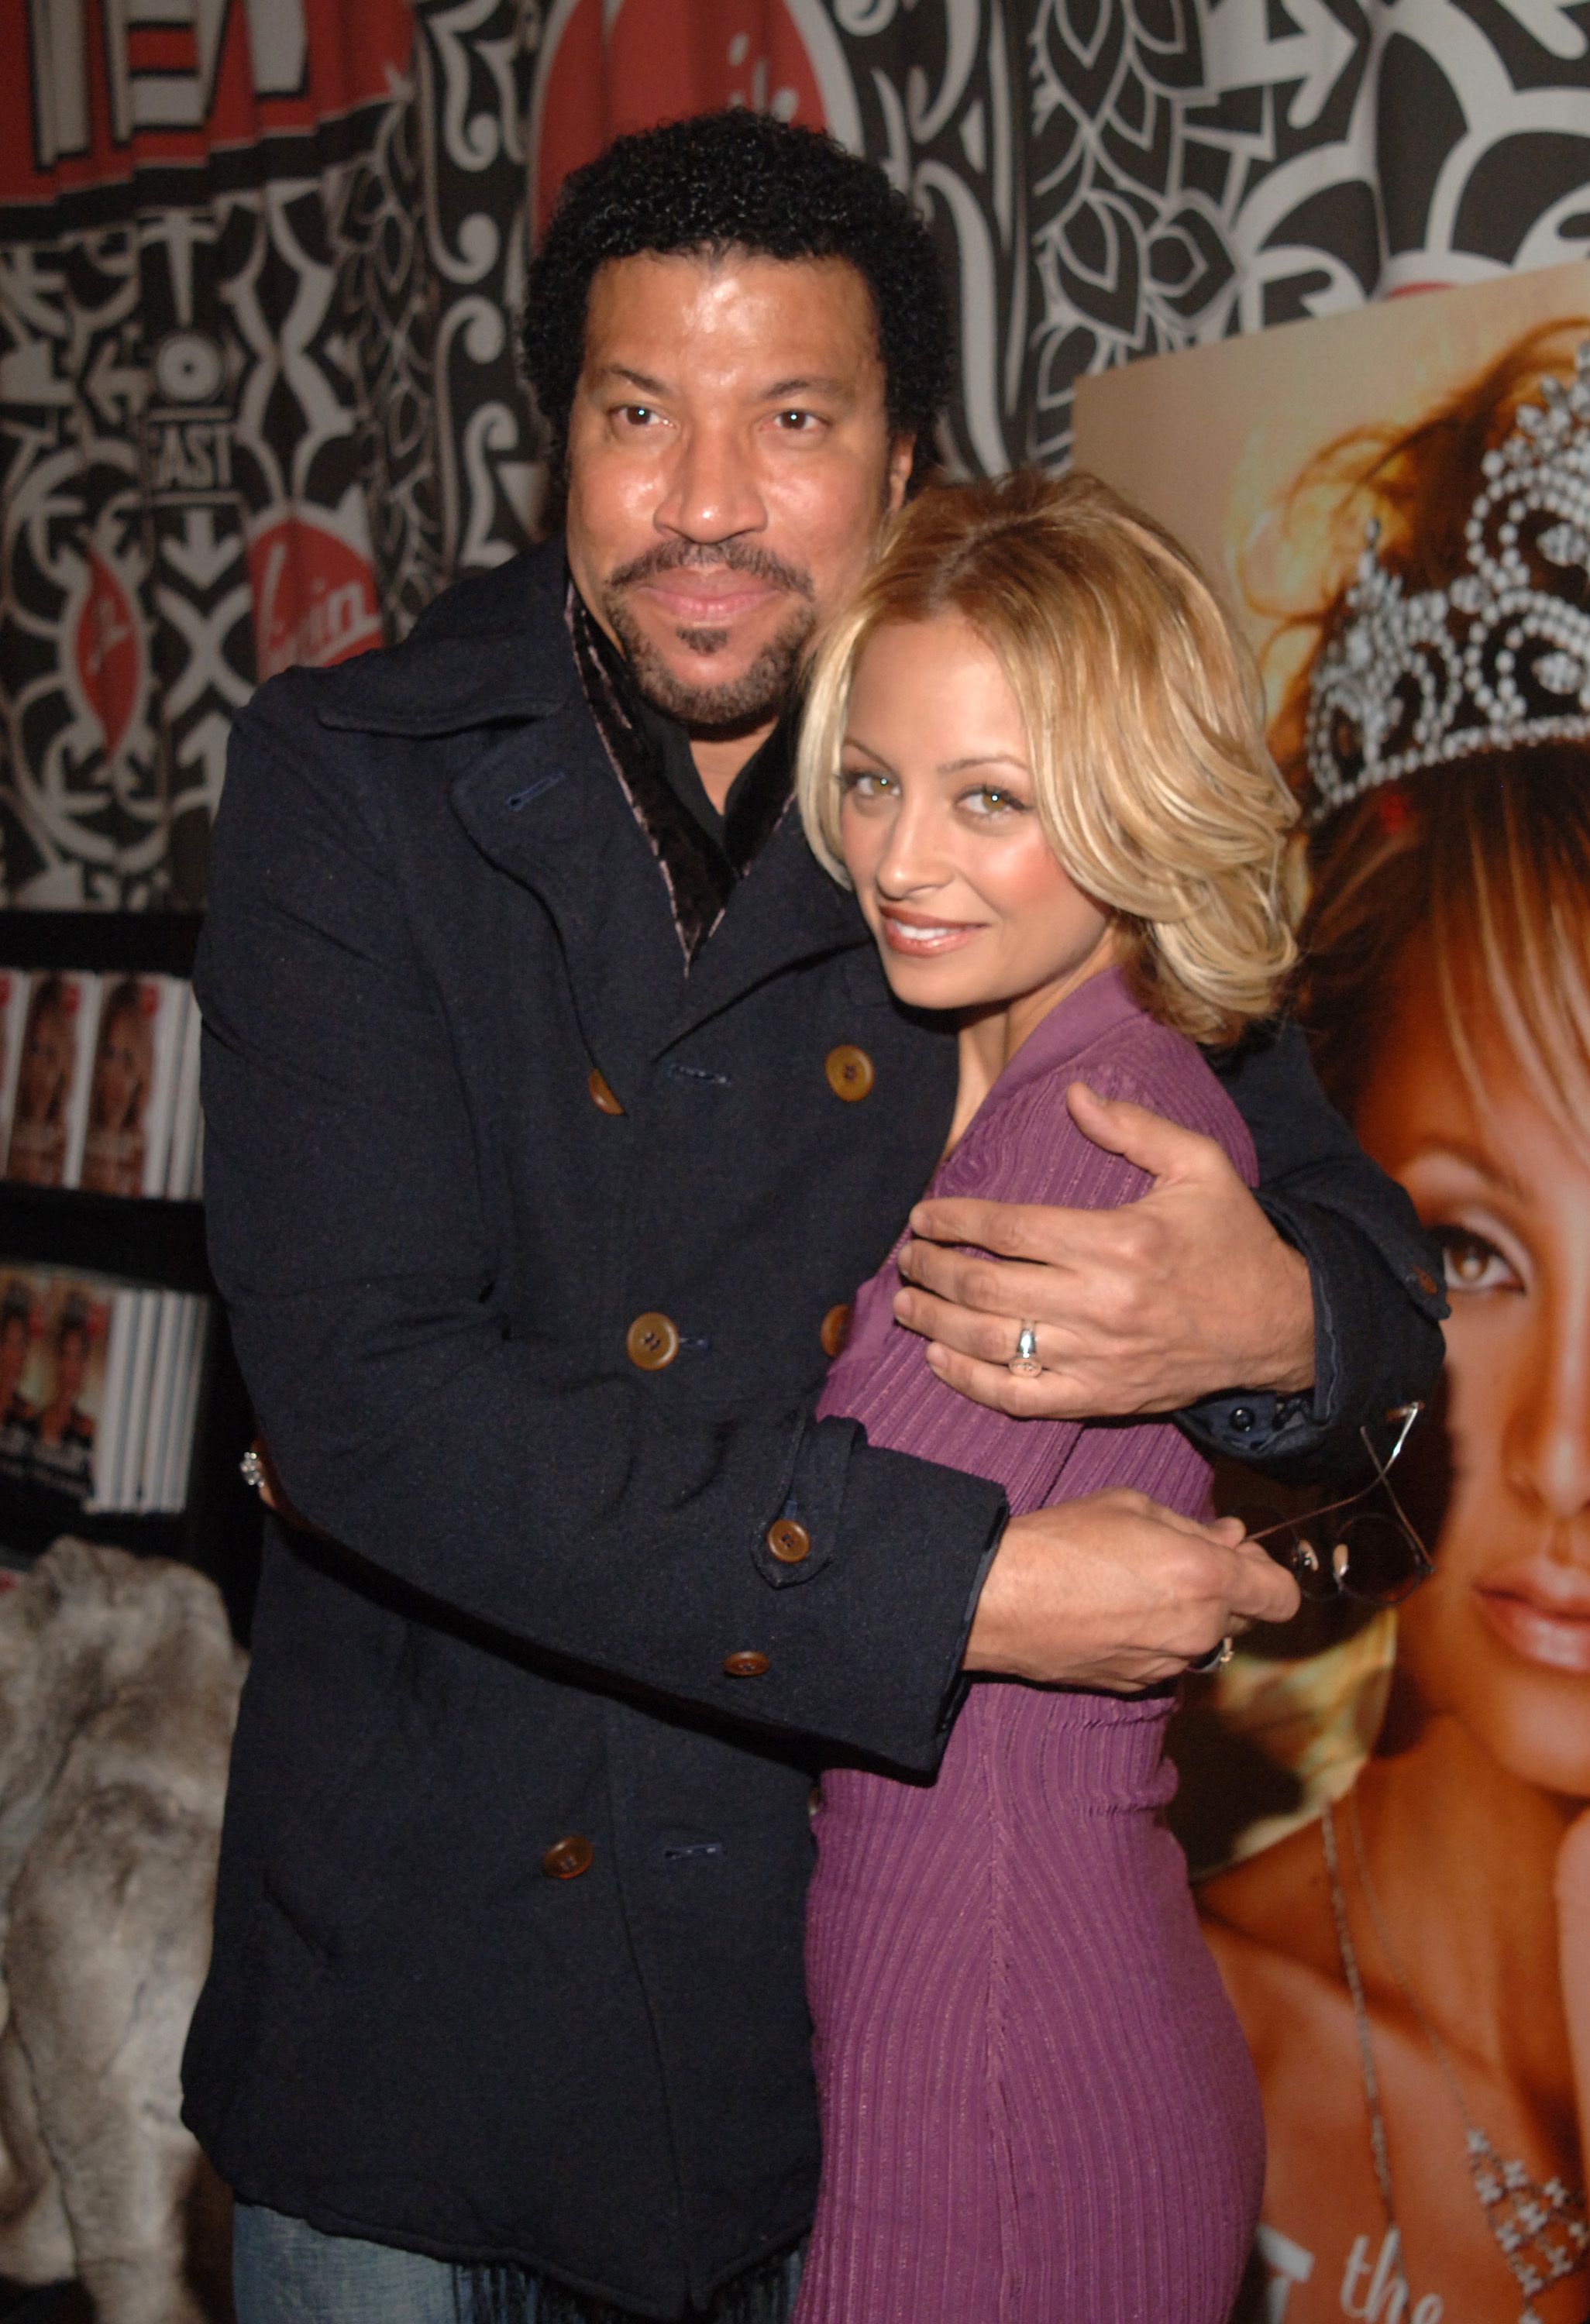 Lionel and Nicole Richie at the "The Truth About Diamonds" book signing at the Virgin Mega Store in Times Square on November 10, 2005, in New York City | Photo: Brad Barket/Getty Images